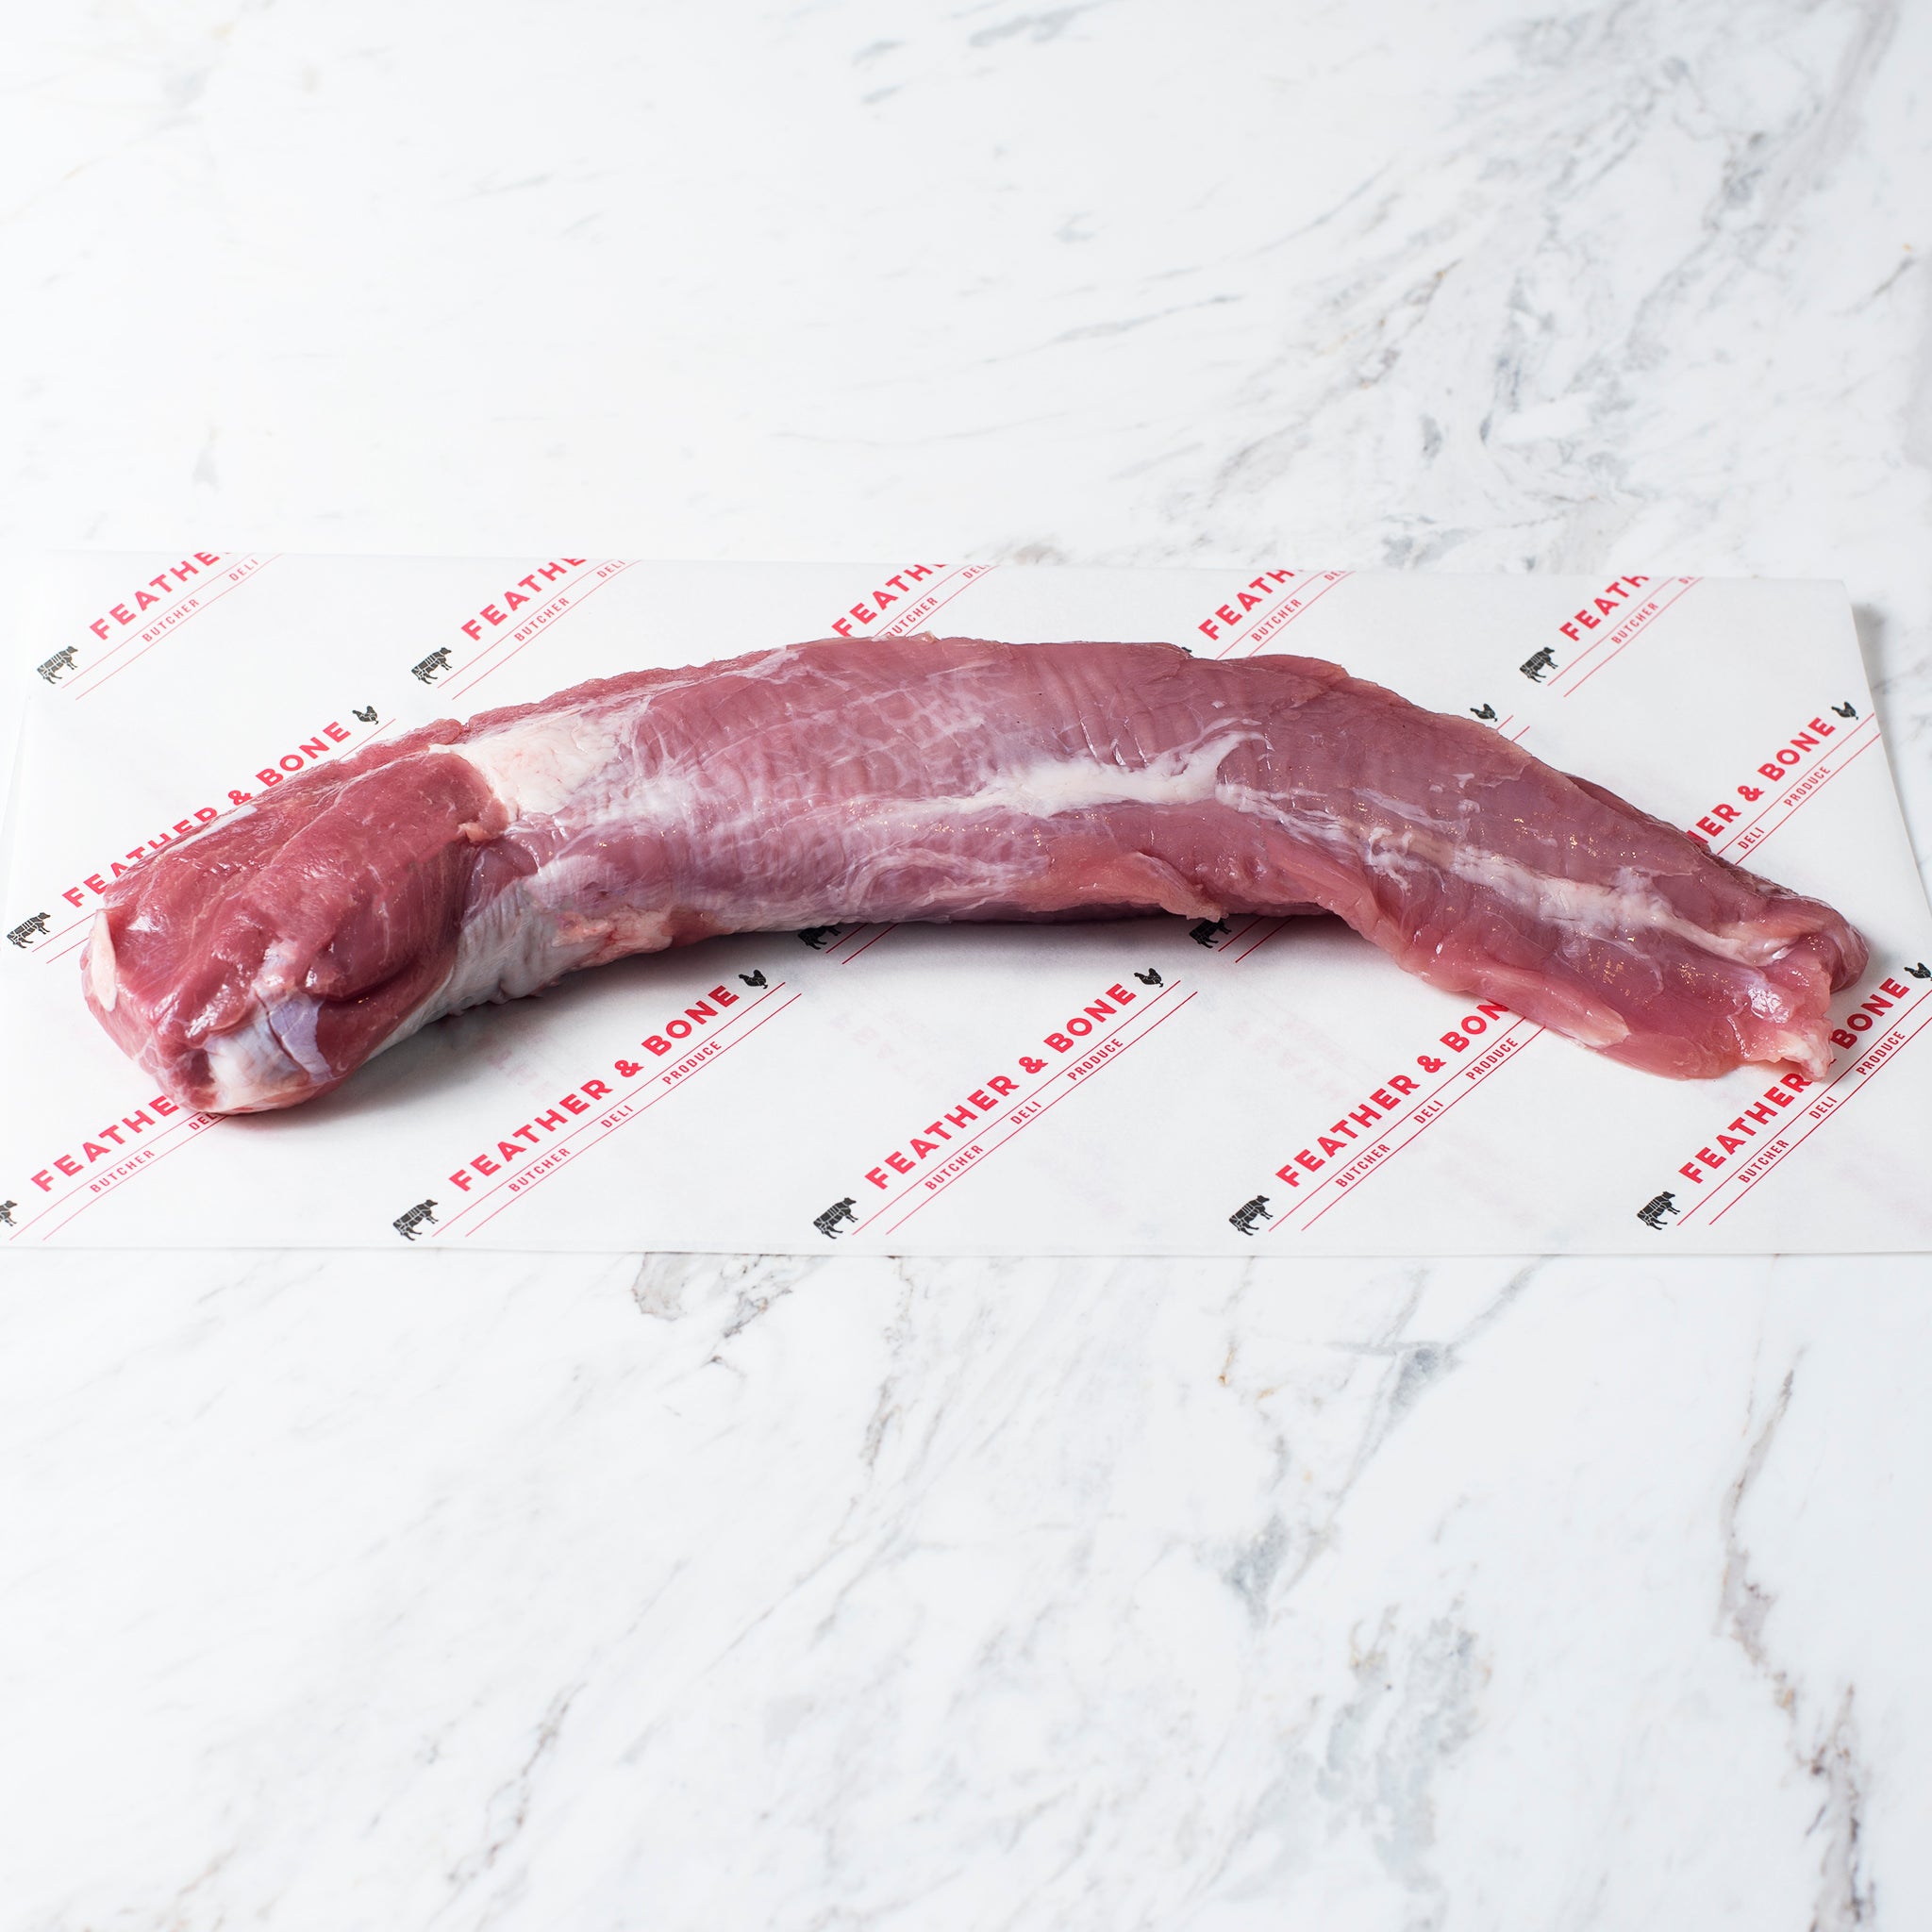 A 	 Free Range Pork Tenderloin 400g on feather & bone branded paper on a marble table top.